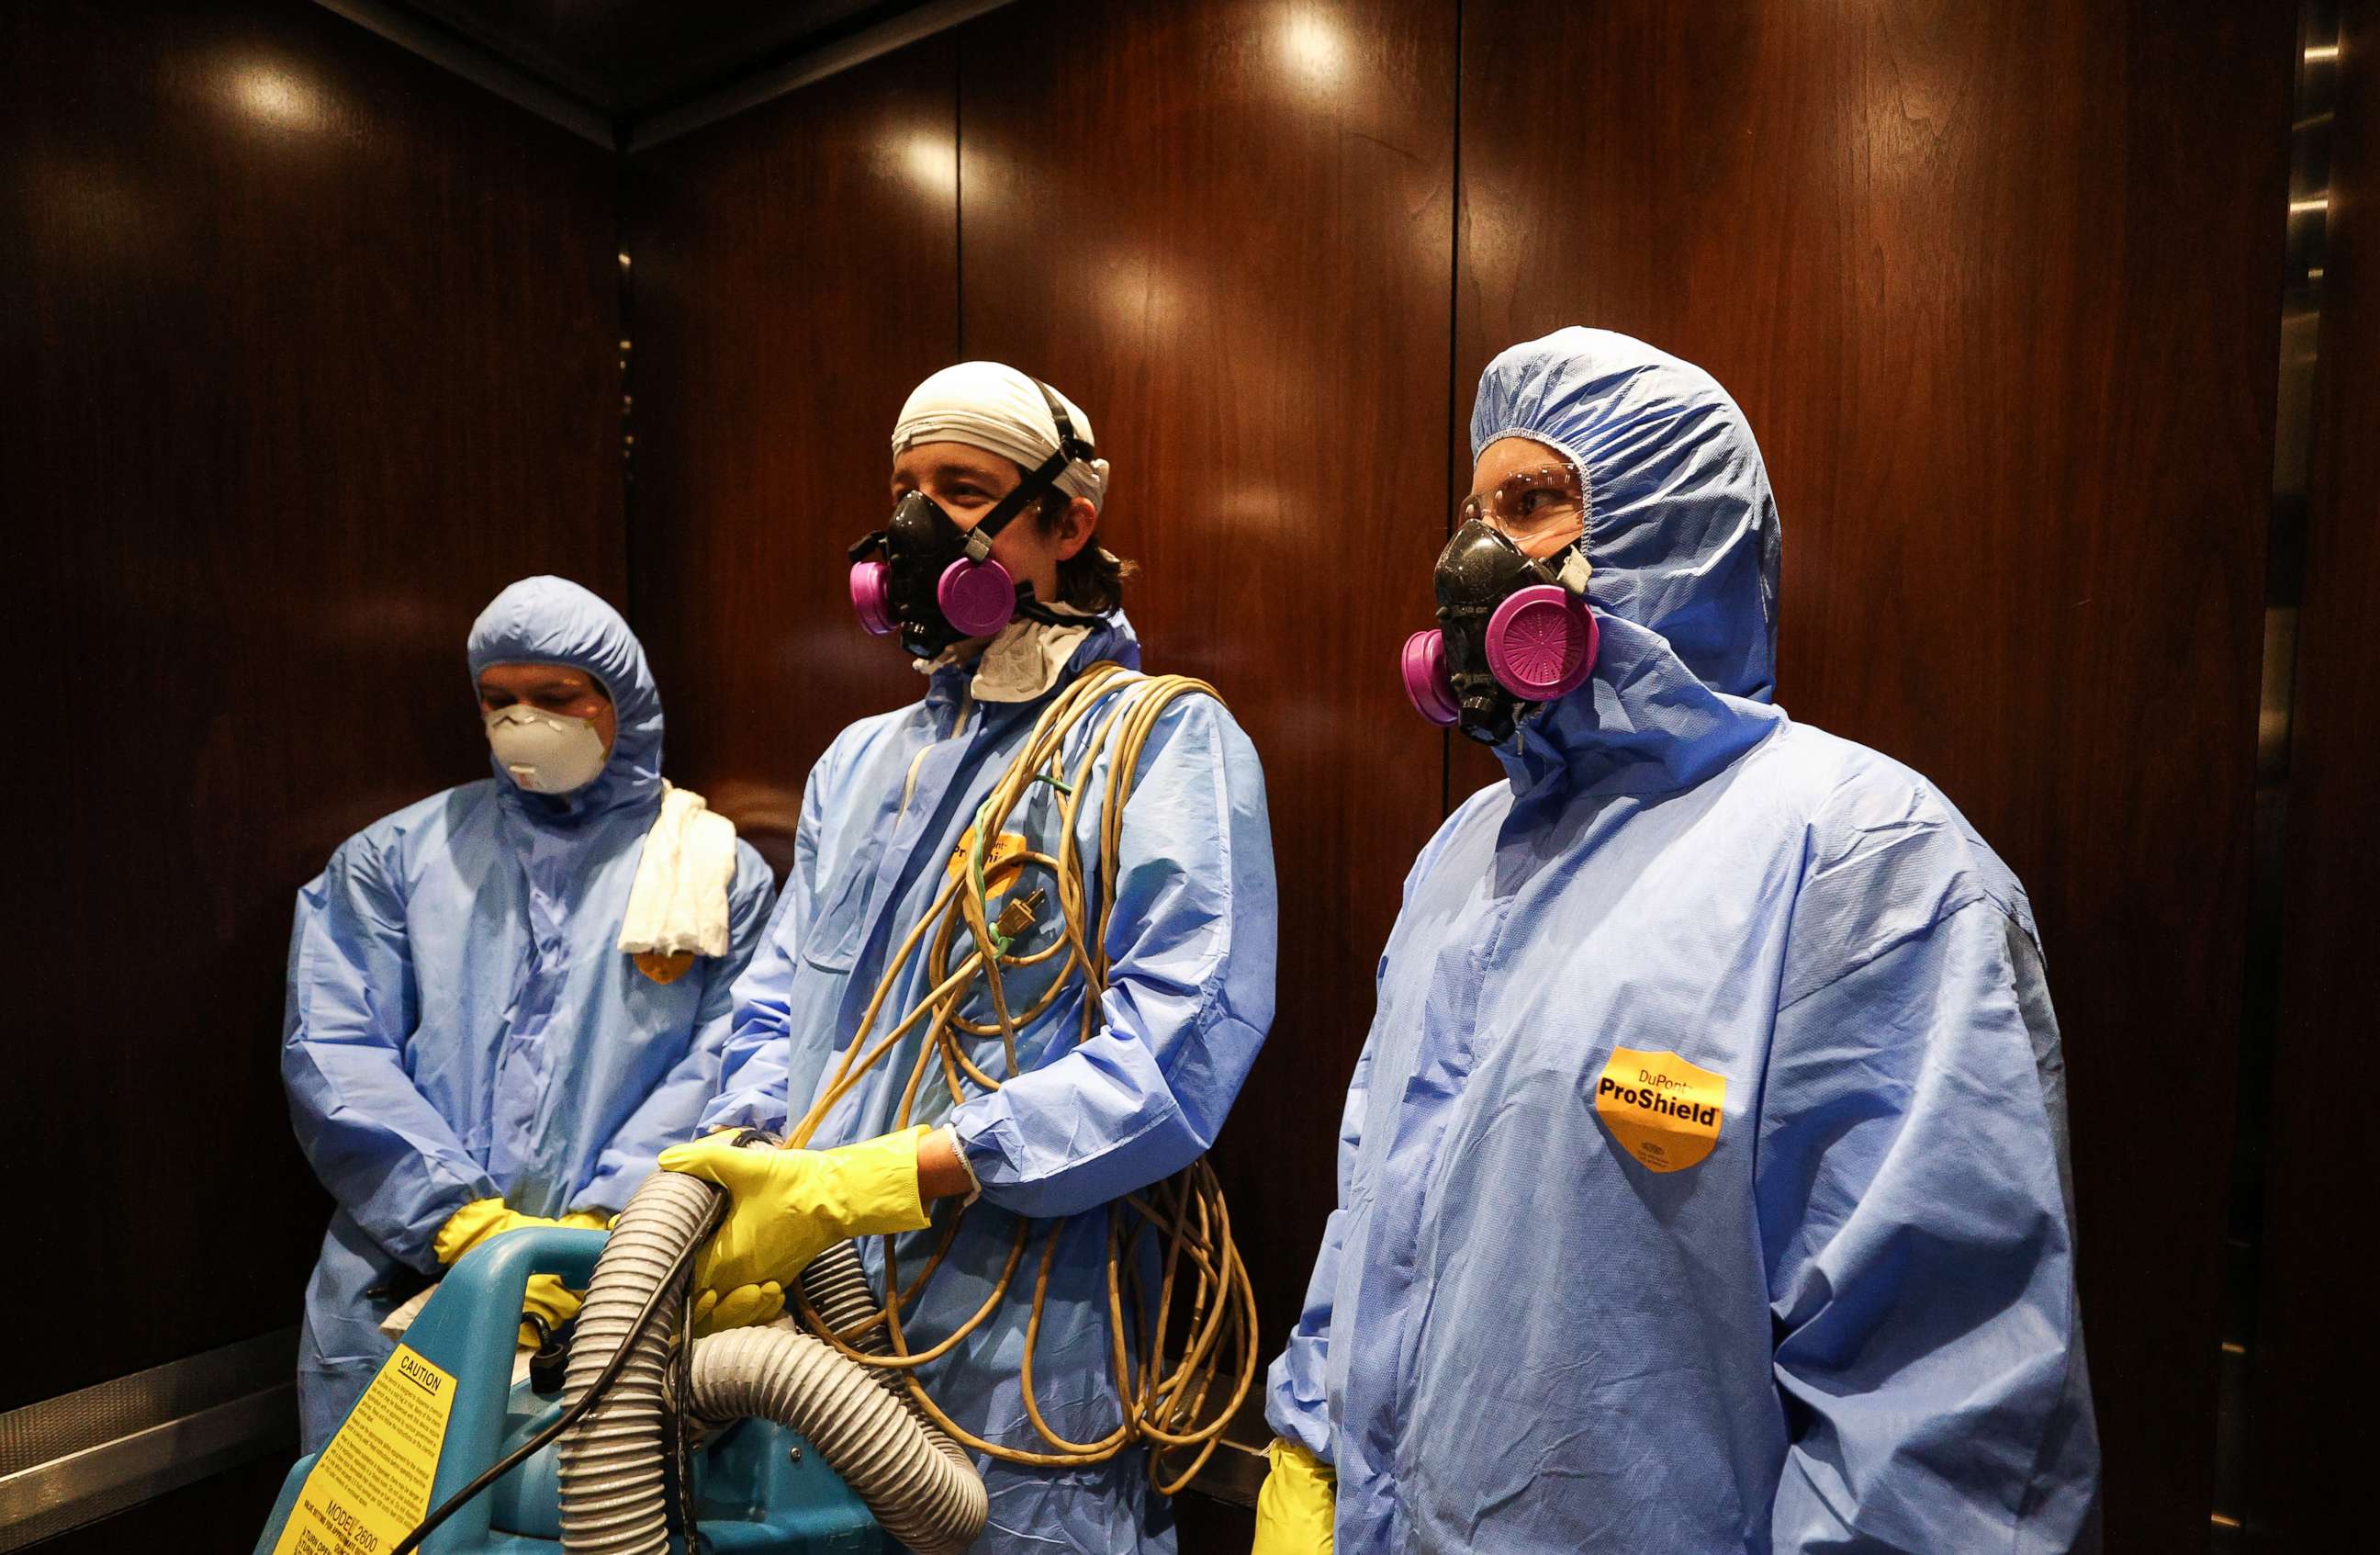 PHOTO: Maryland Cleaning and Abatement Services employees Graham Sevy (L), Bob Wiglesworth, (C) and Alec Pine (R) ride in an elevator before preforming a preventative fogging and damp wipe treatment on March 21, 2020 in Hunt Valley, Maryland. 